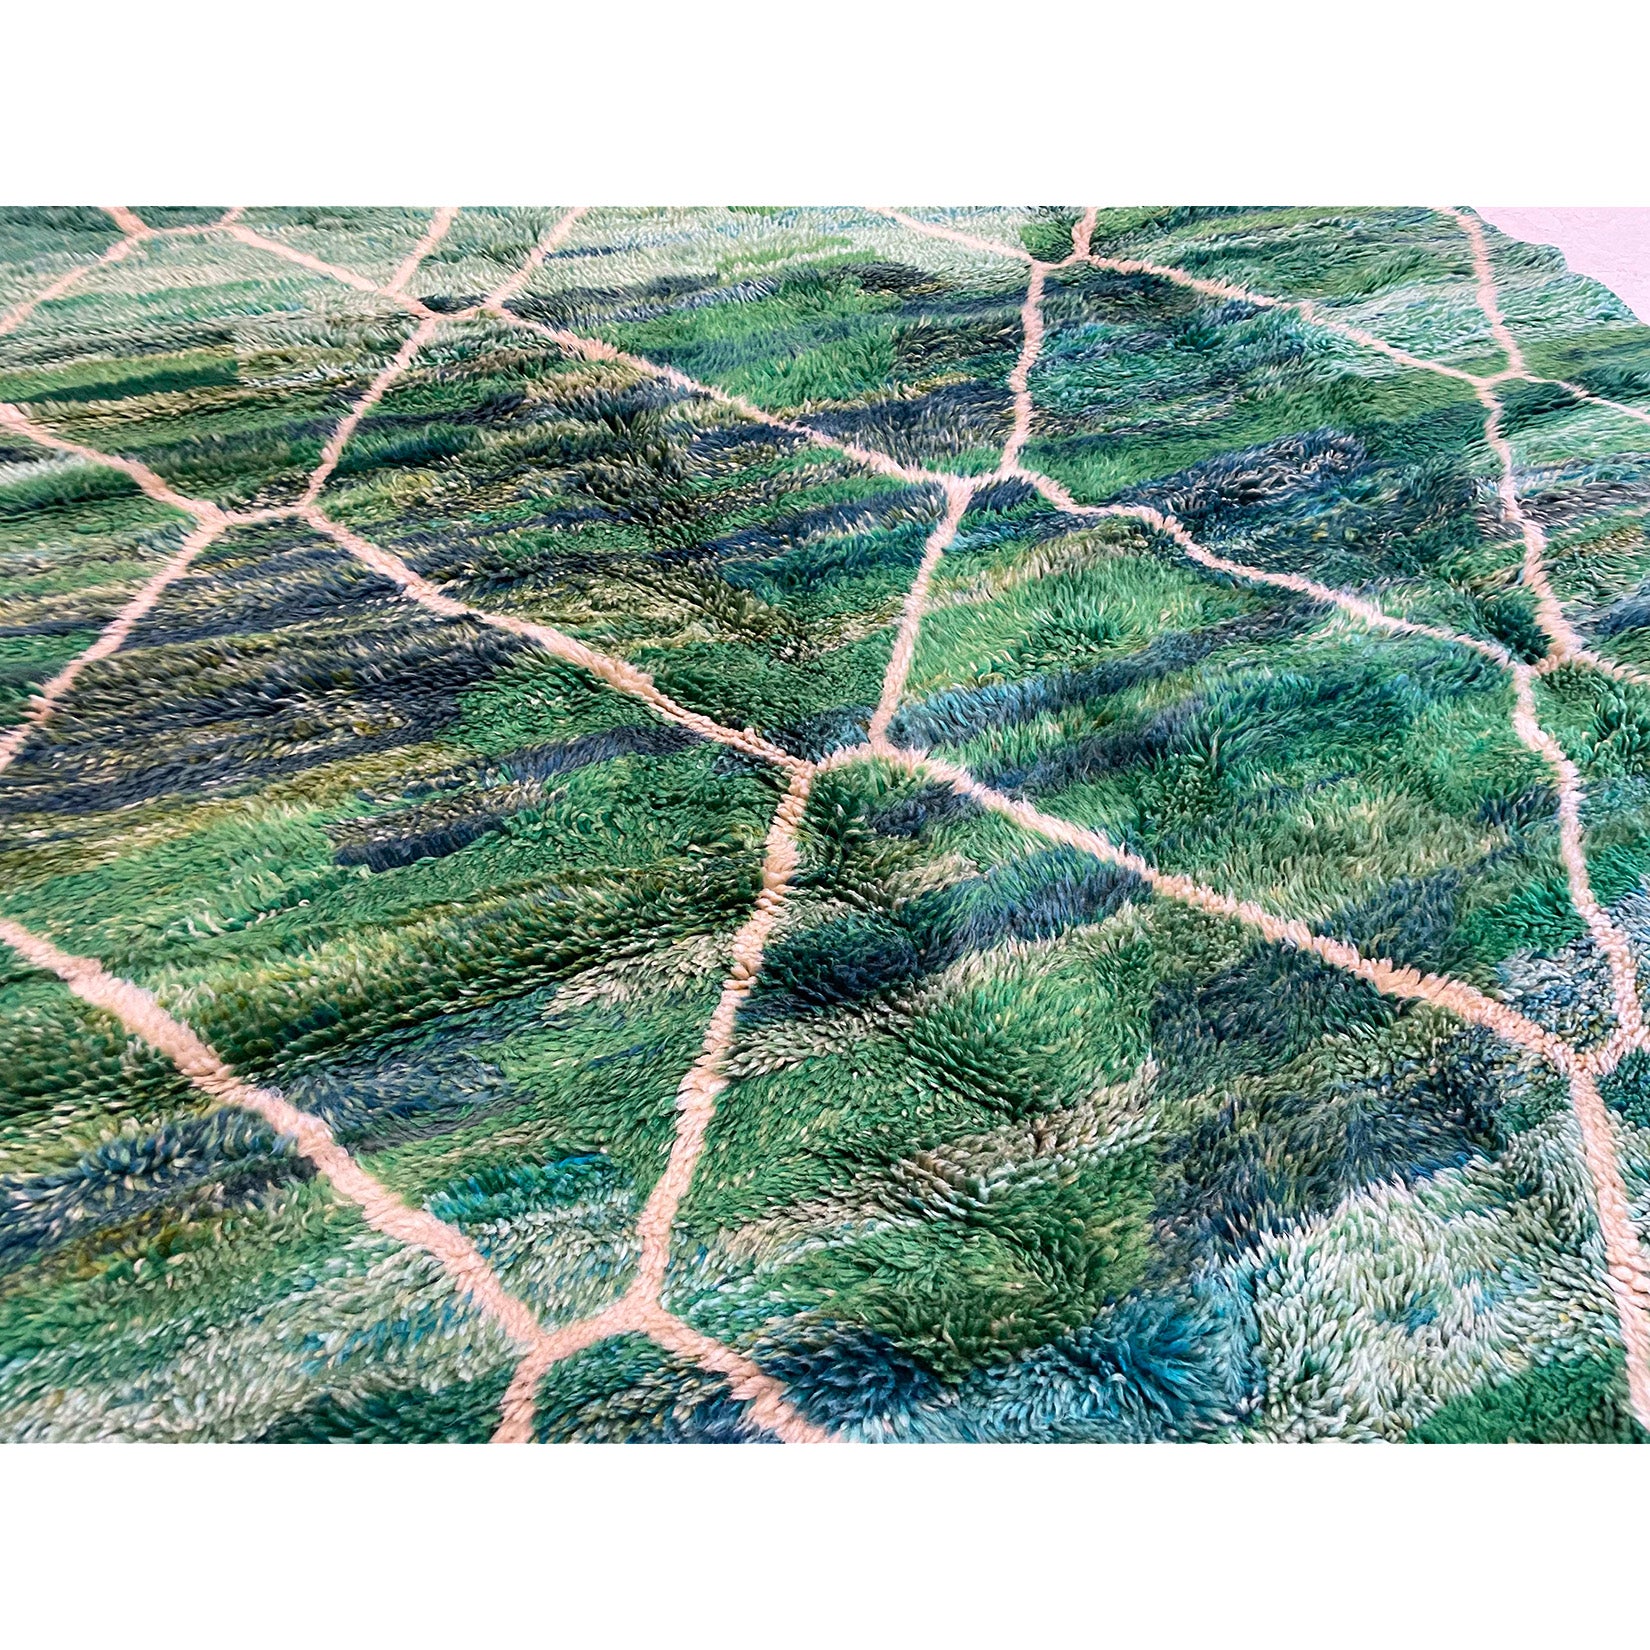 Tightly woven plush green and blue Moroccan berber rug with contemporary colors and Beni Ourain linework in white  | Kantara Moroccan Rugs in Los Angeles at The Rug Shop